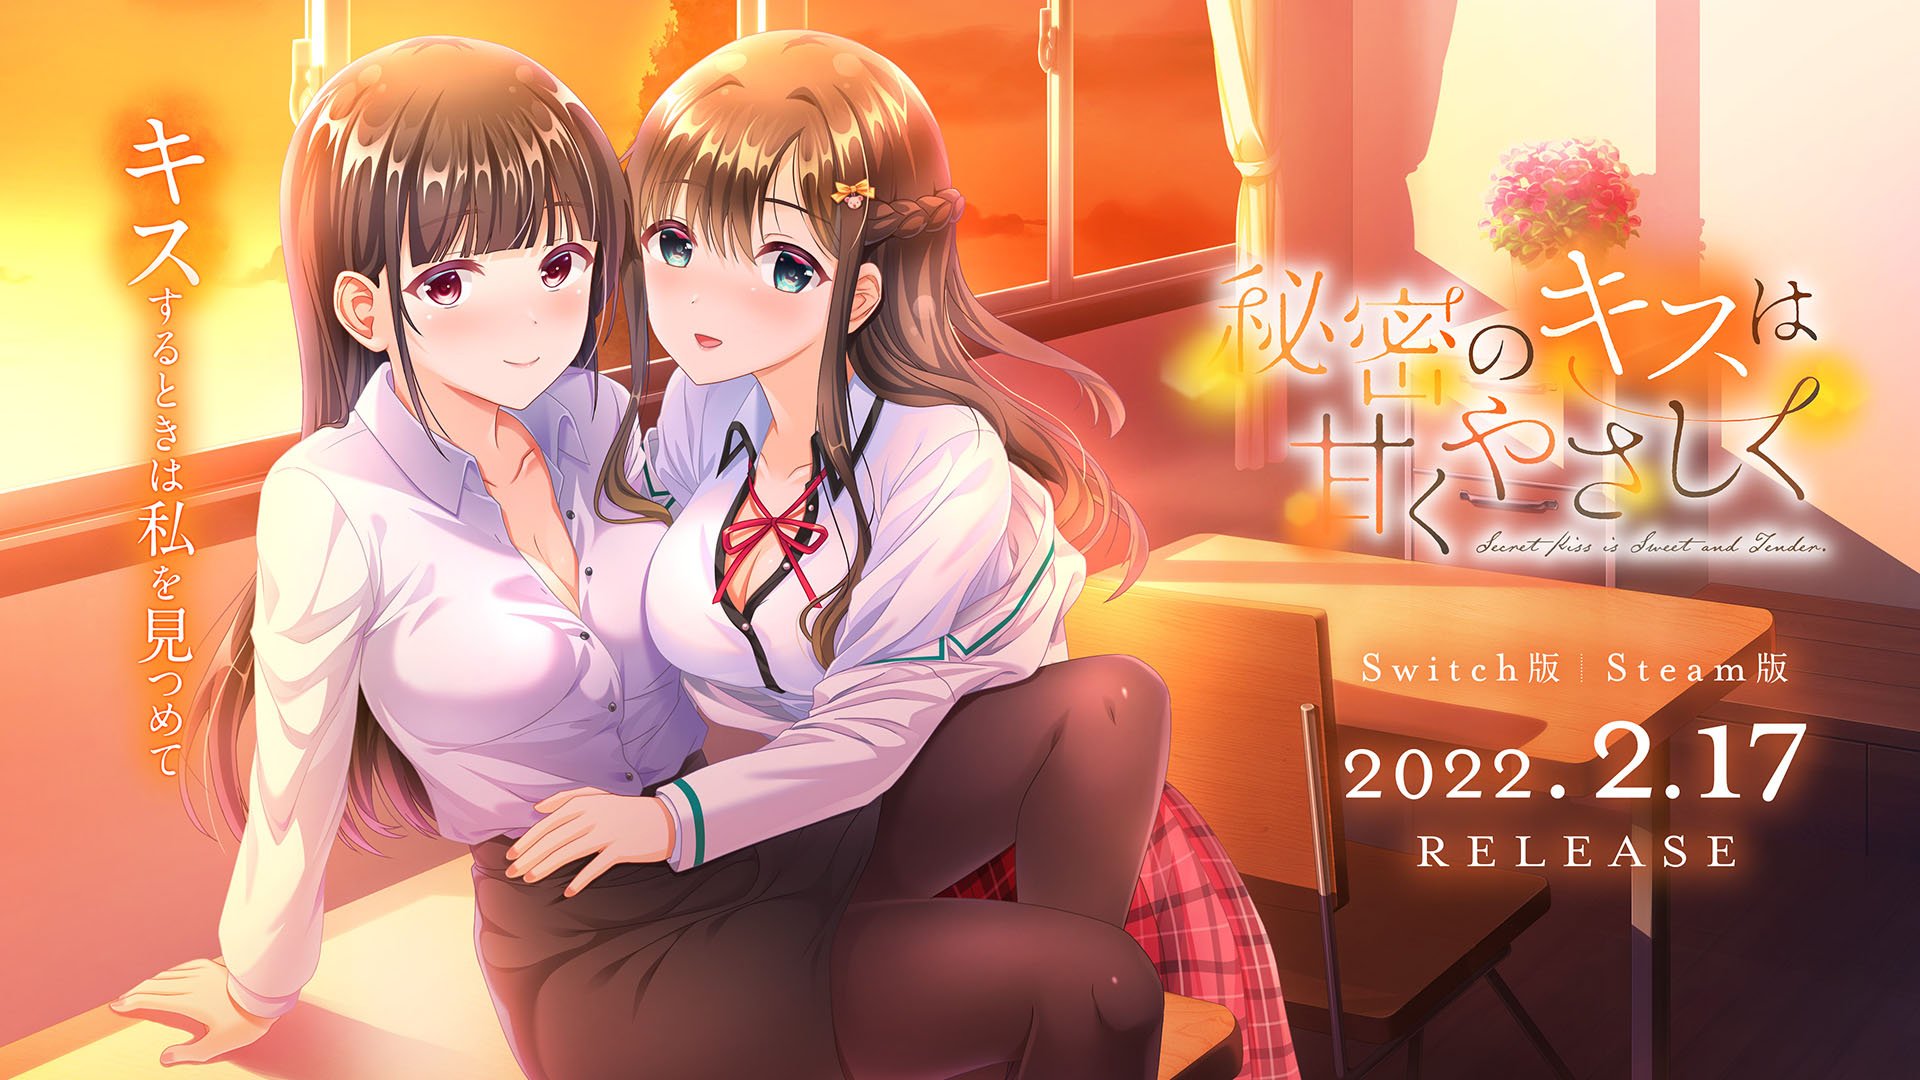 Yuri visual novel Secret Kiss is Sweet and Tender announced for Switch, PC ...